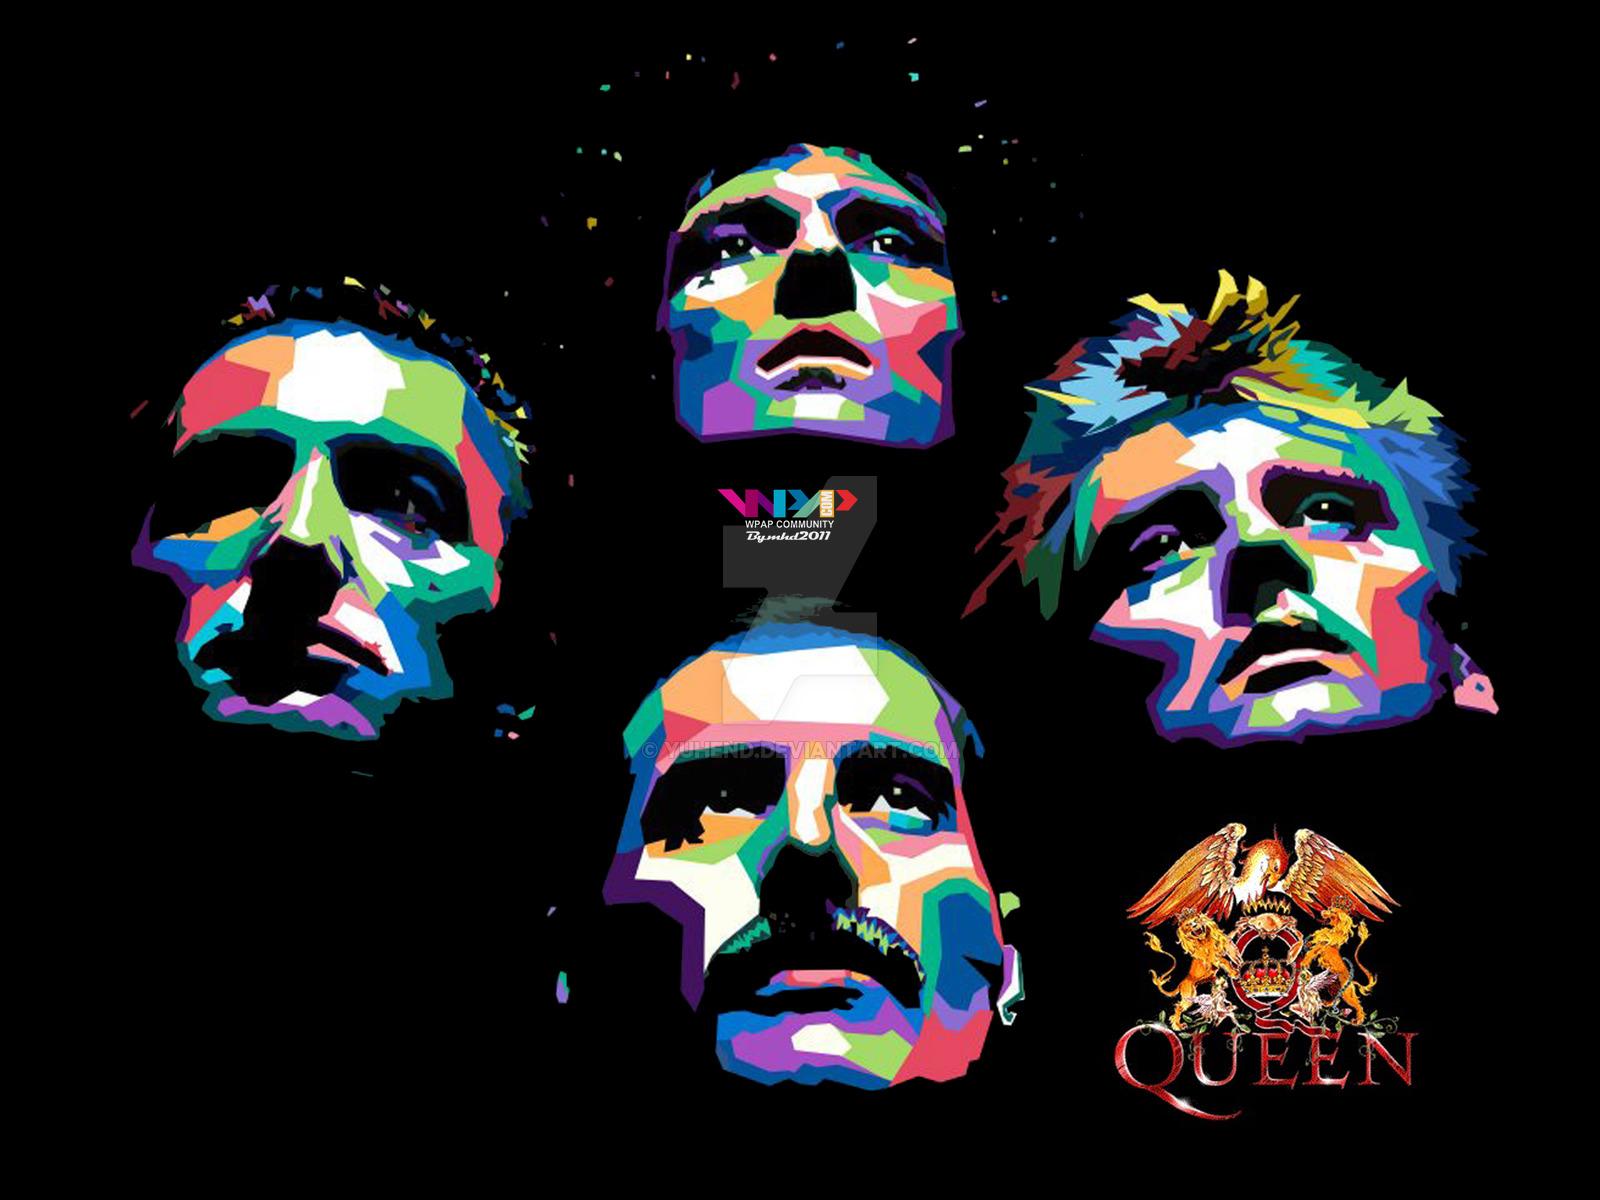 Bohemian Rhapsody download the new for android